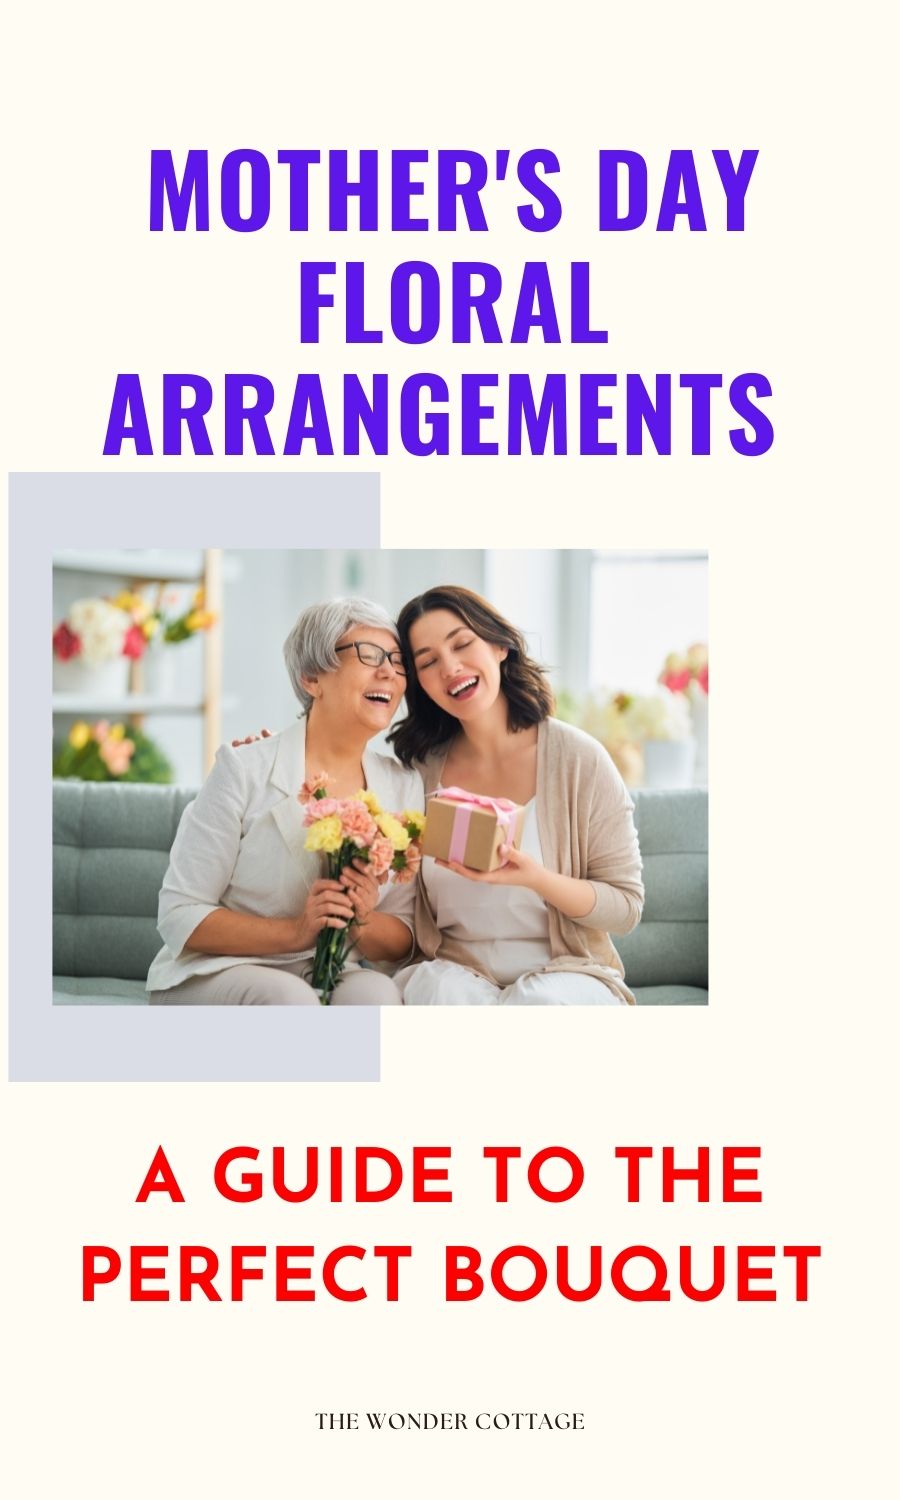 Mother's Day Floral Arrangements: A Guide To The Perfect Bouquet